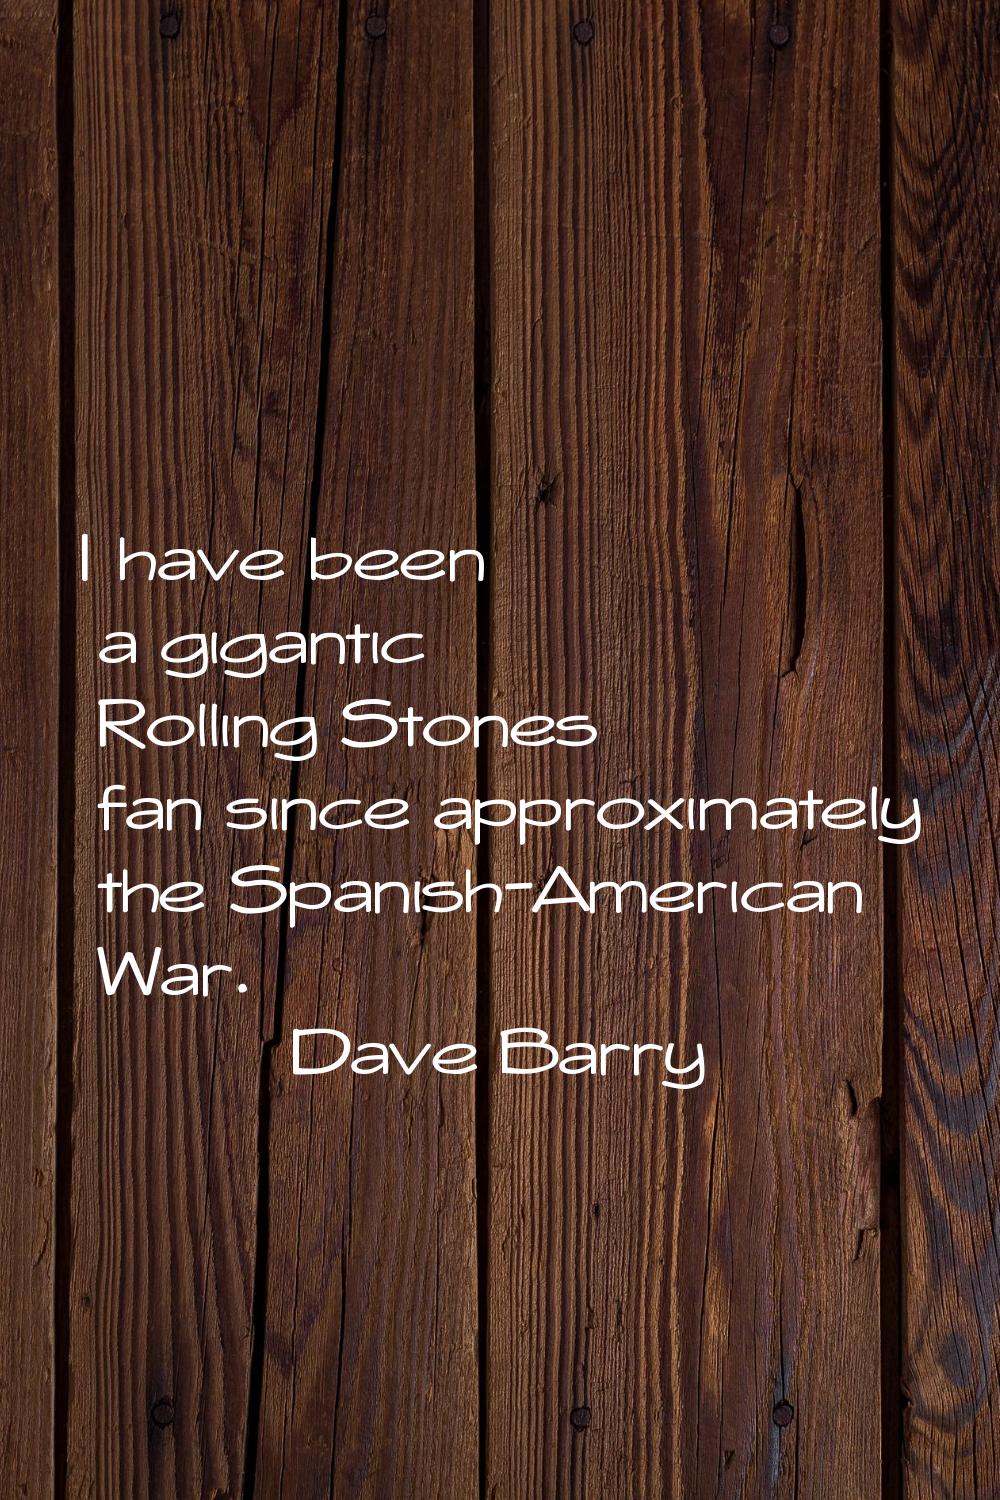 I have been a gigantic Rolling Stones fan since approximately the Spanish-American War.